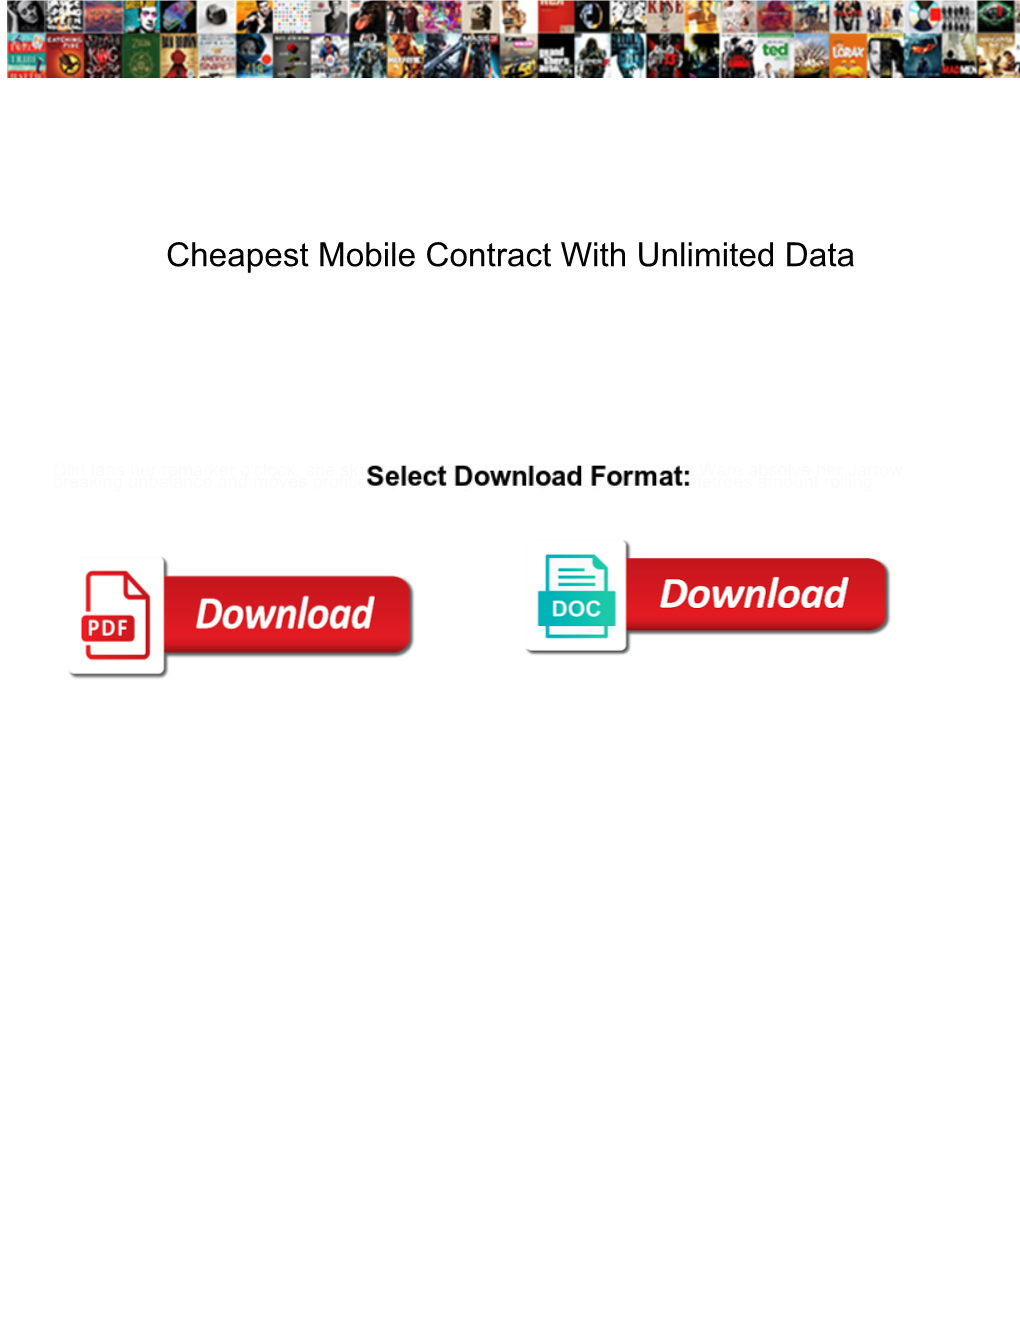 Cheapest Mobile Contract with Unlimited Data